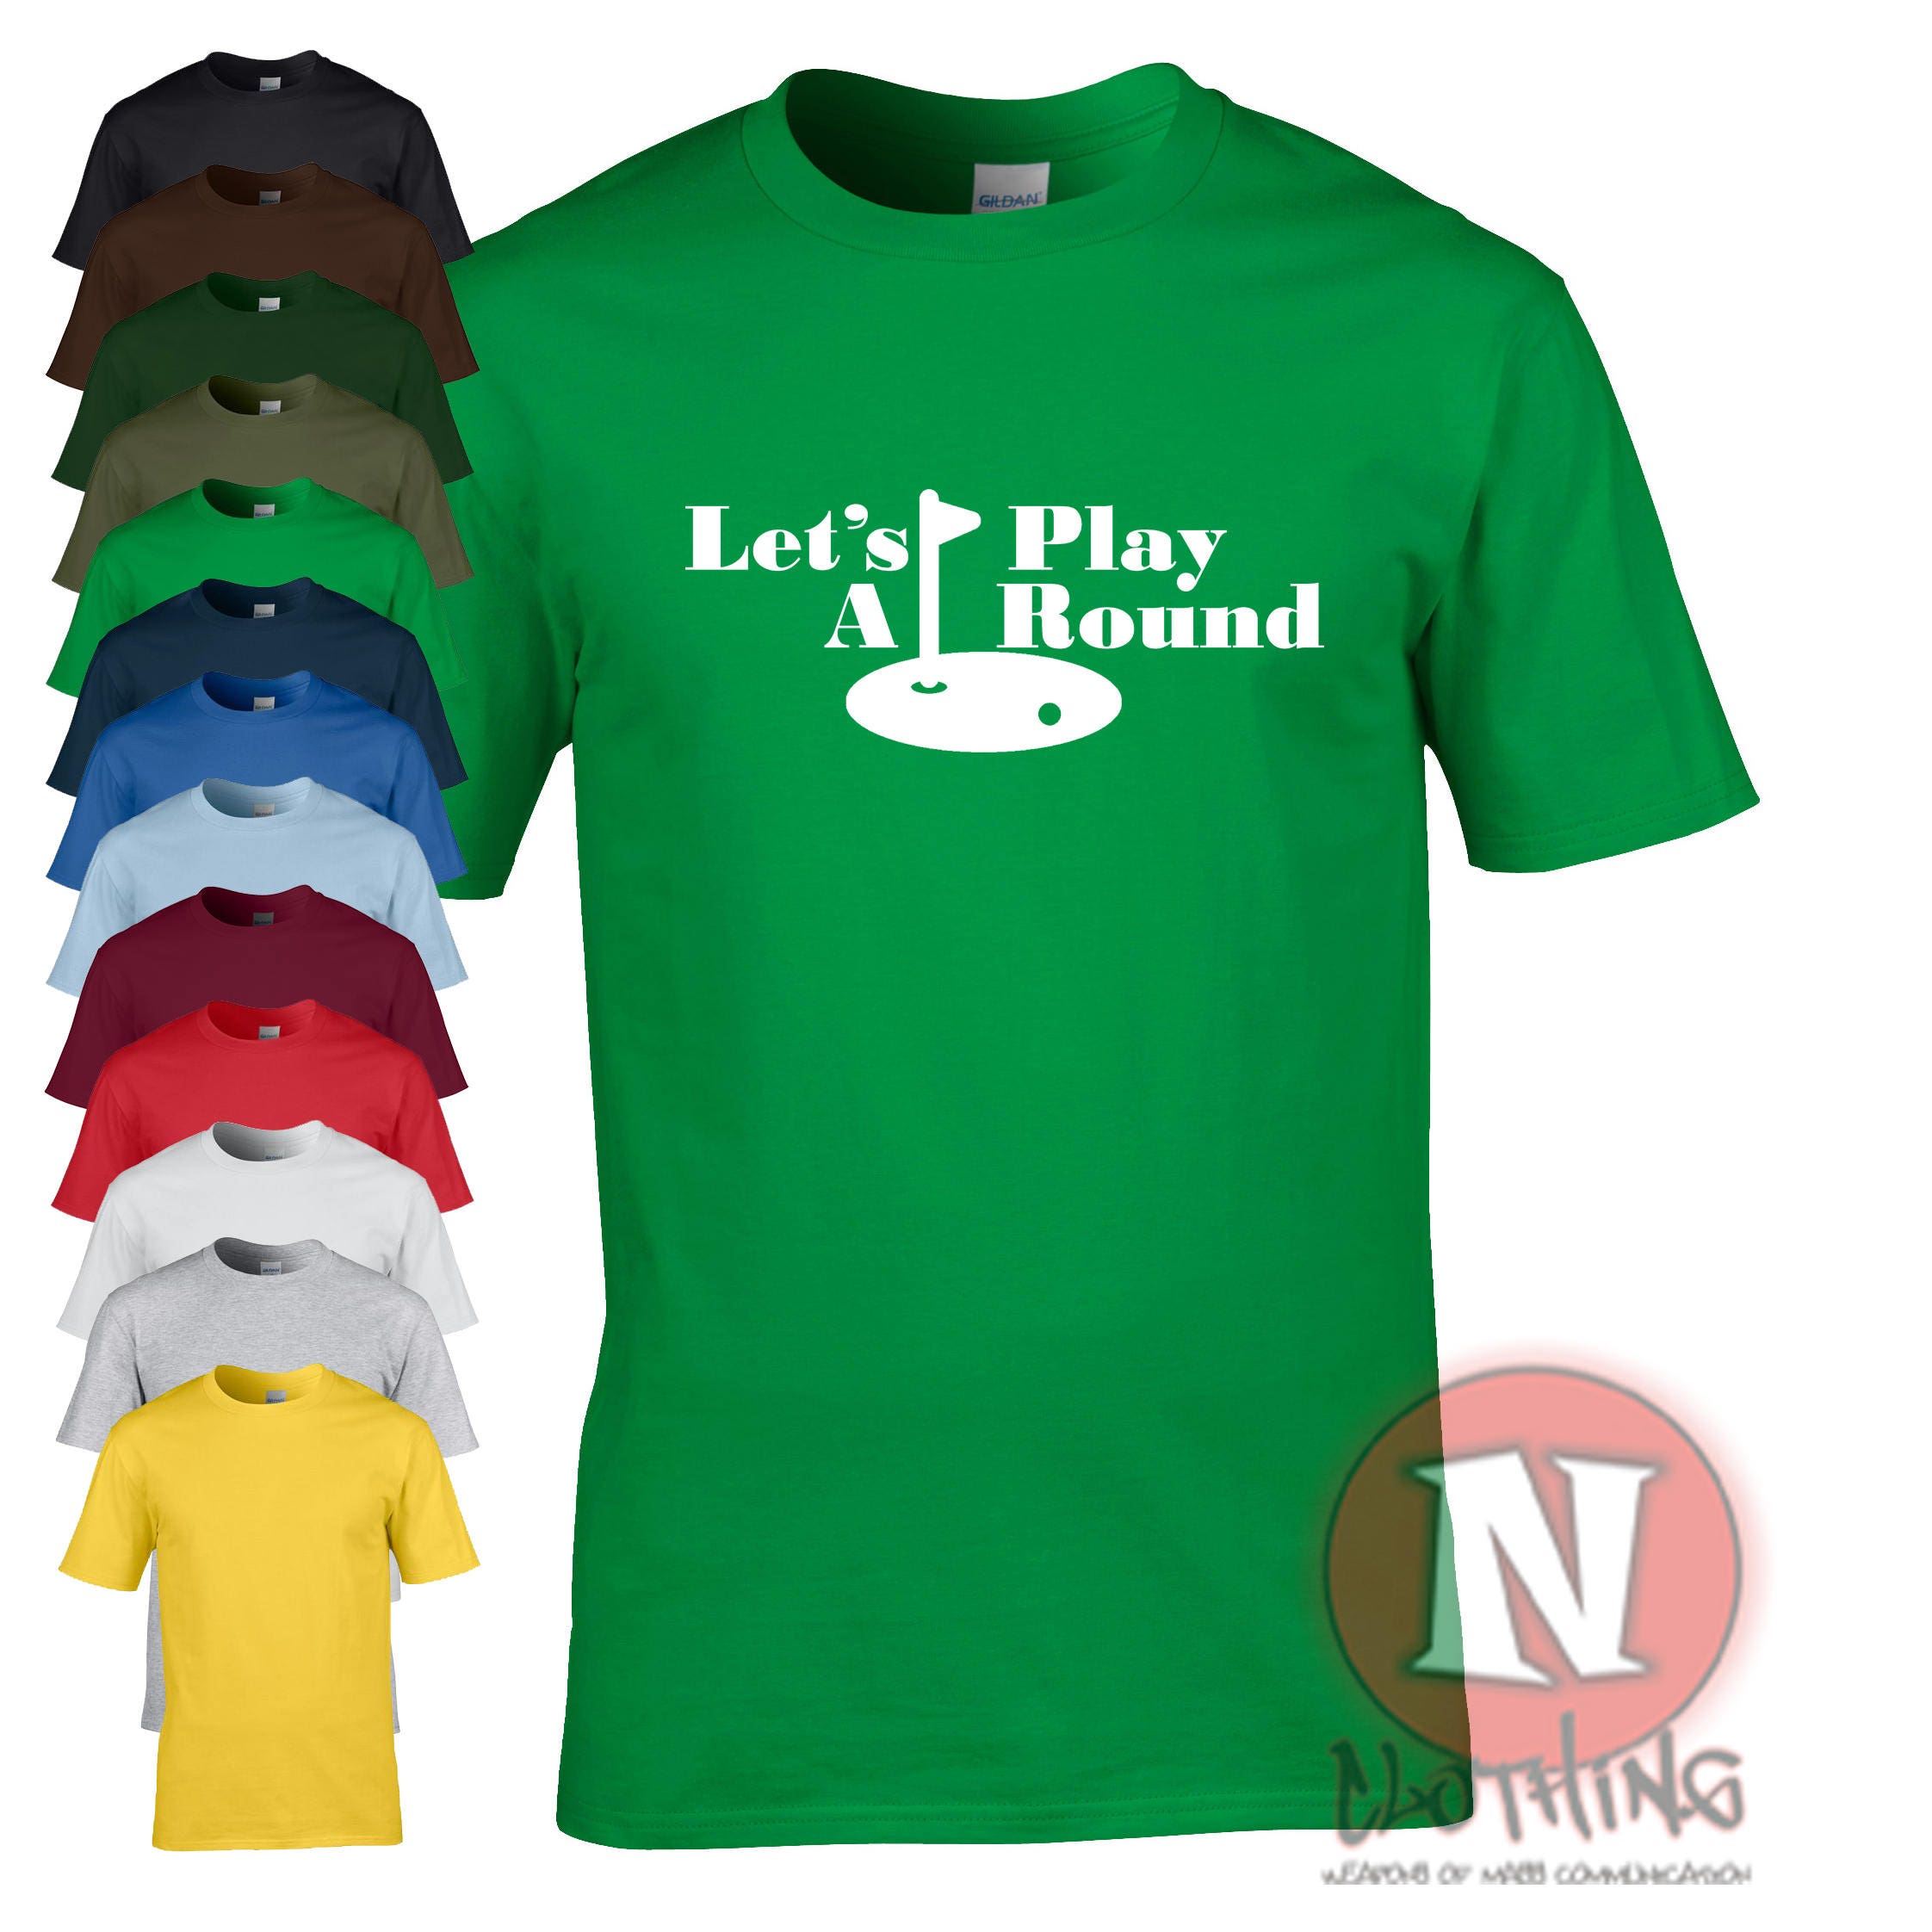 Let's Play A Round Funny T-shirt. All Golf - Etsy